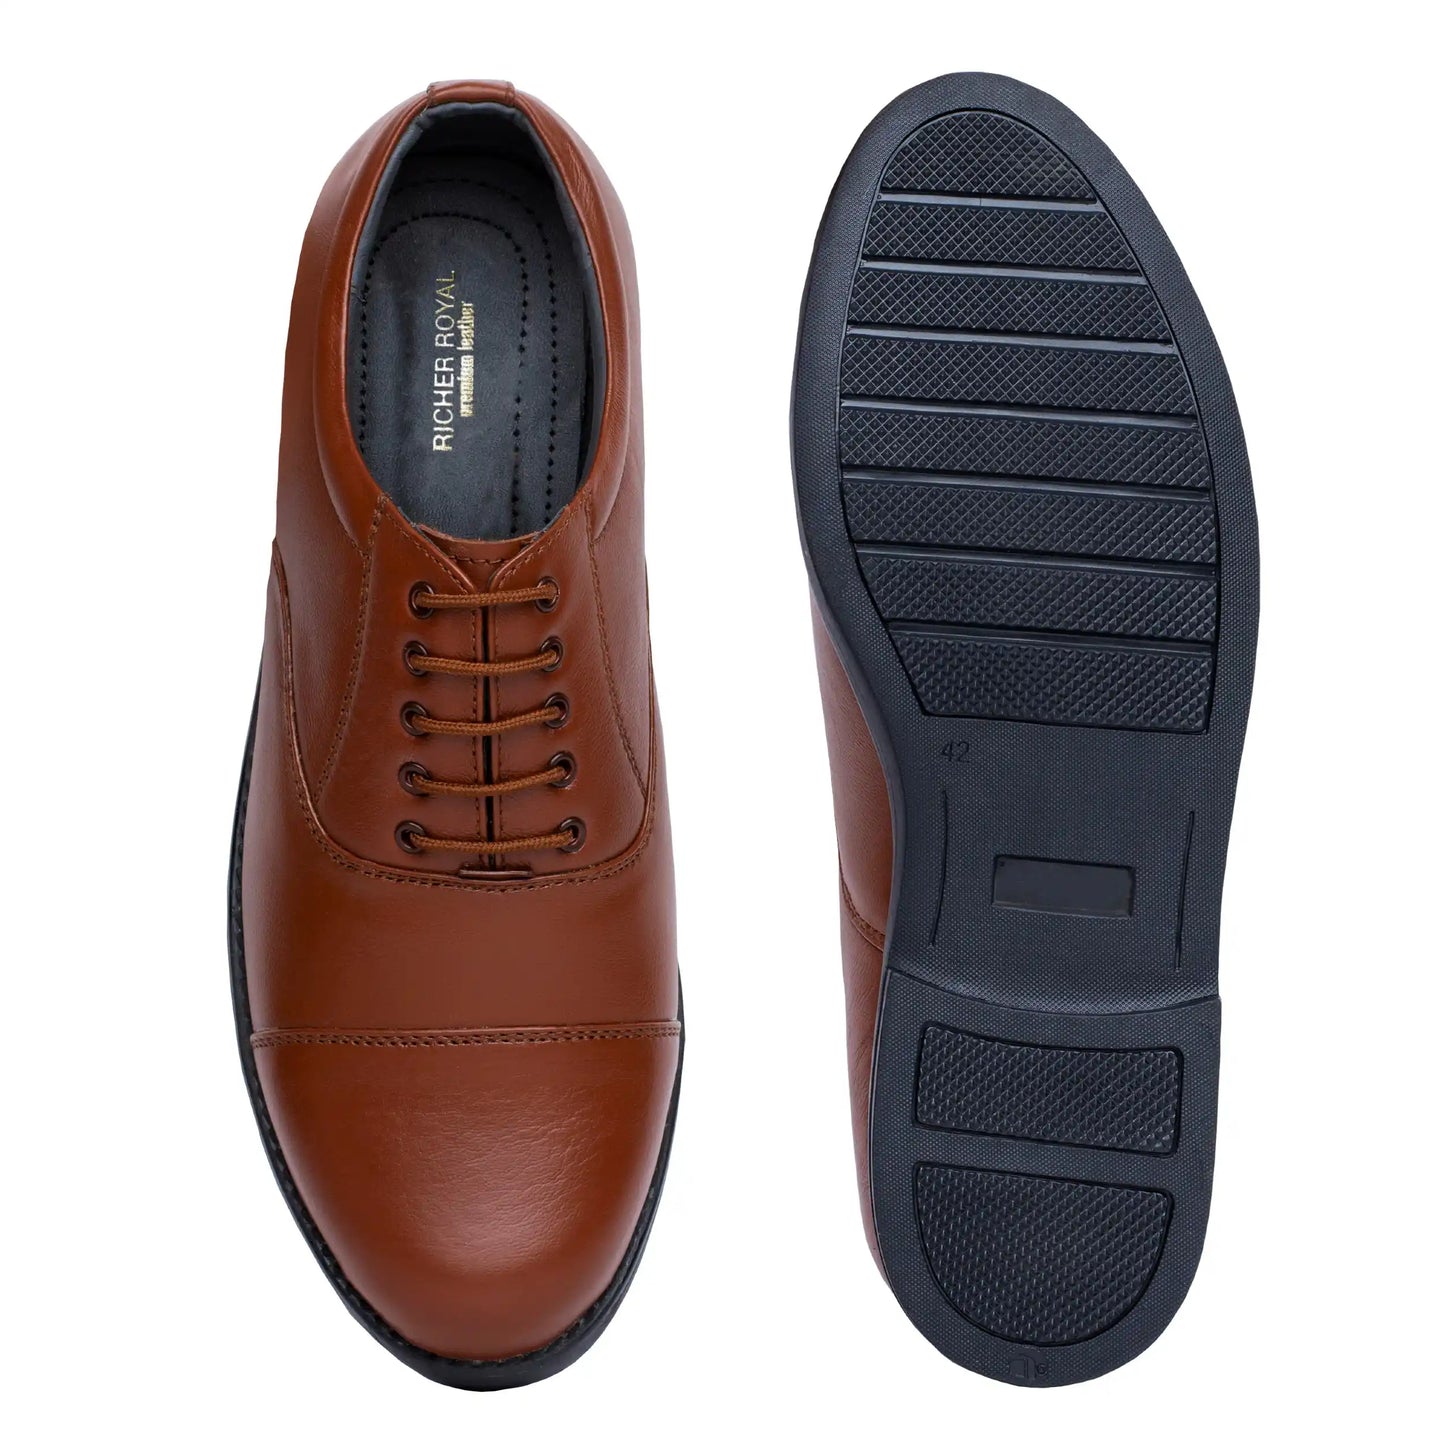 Police Shoes Pure Leather Lace Up